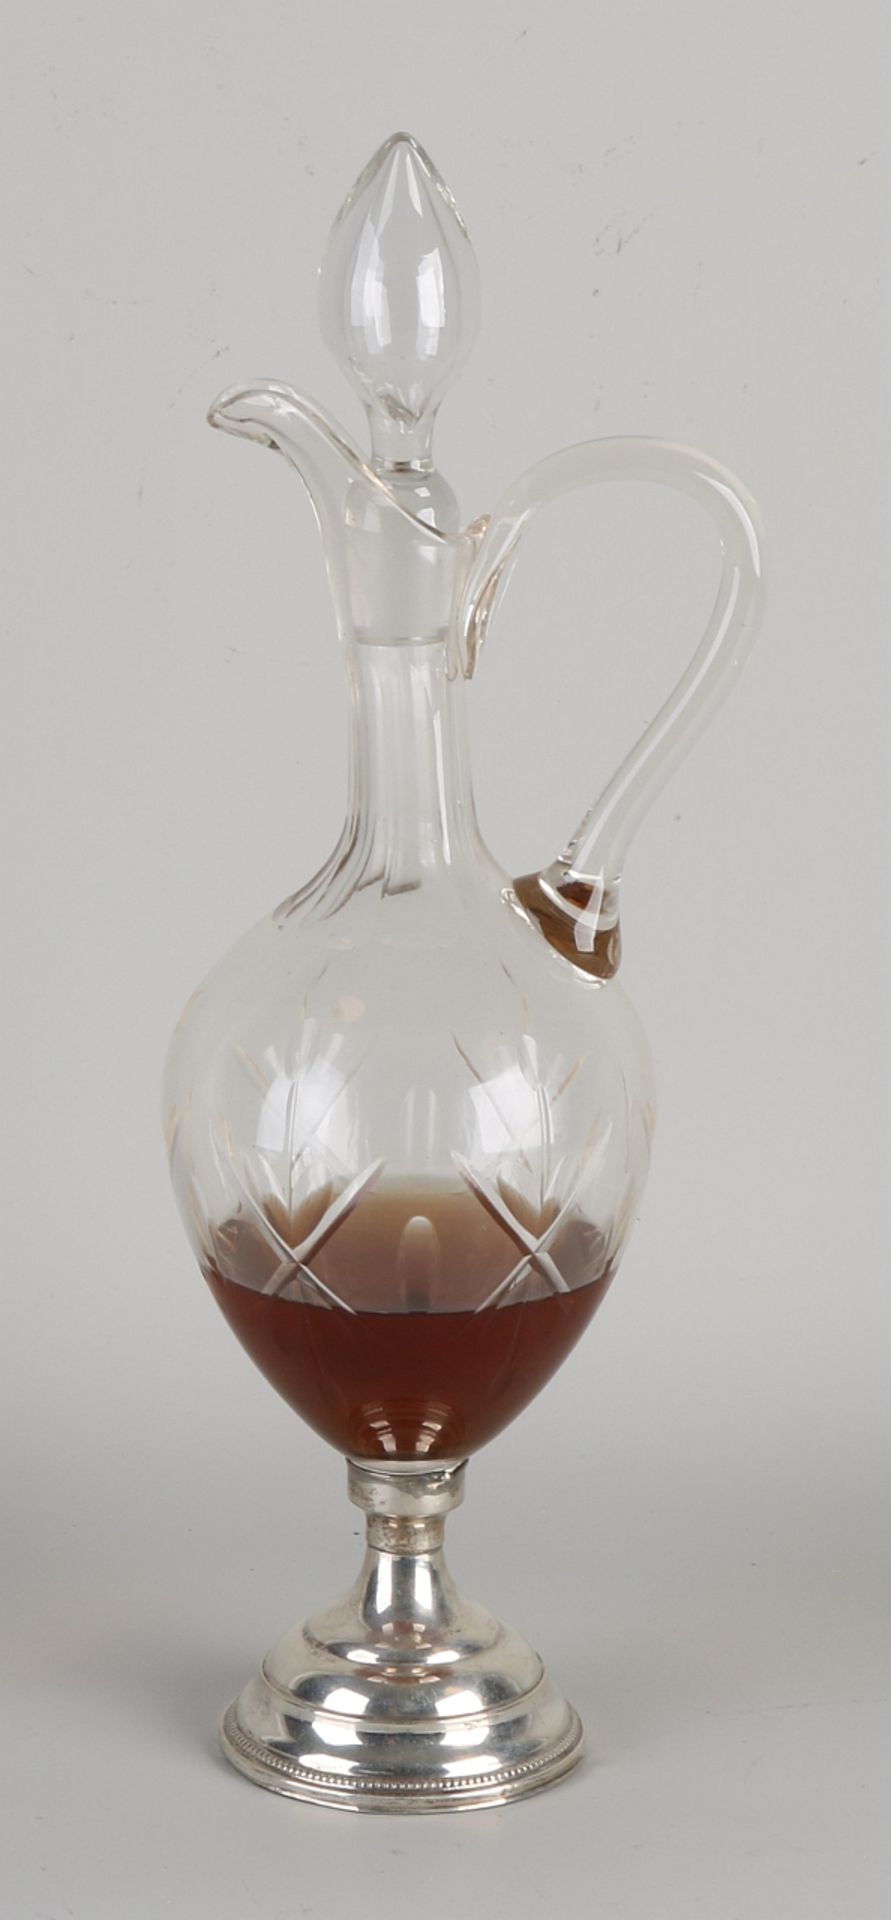 Decanter on a silver base